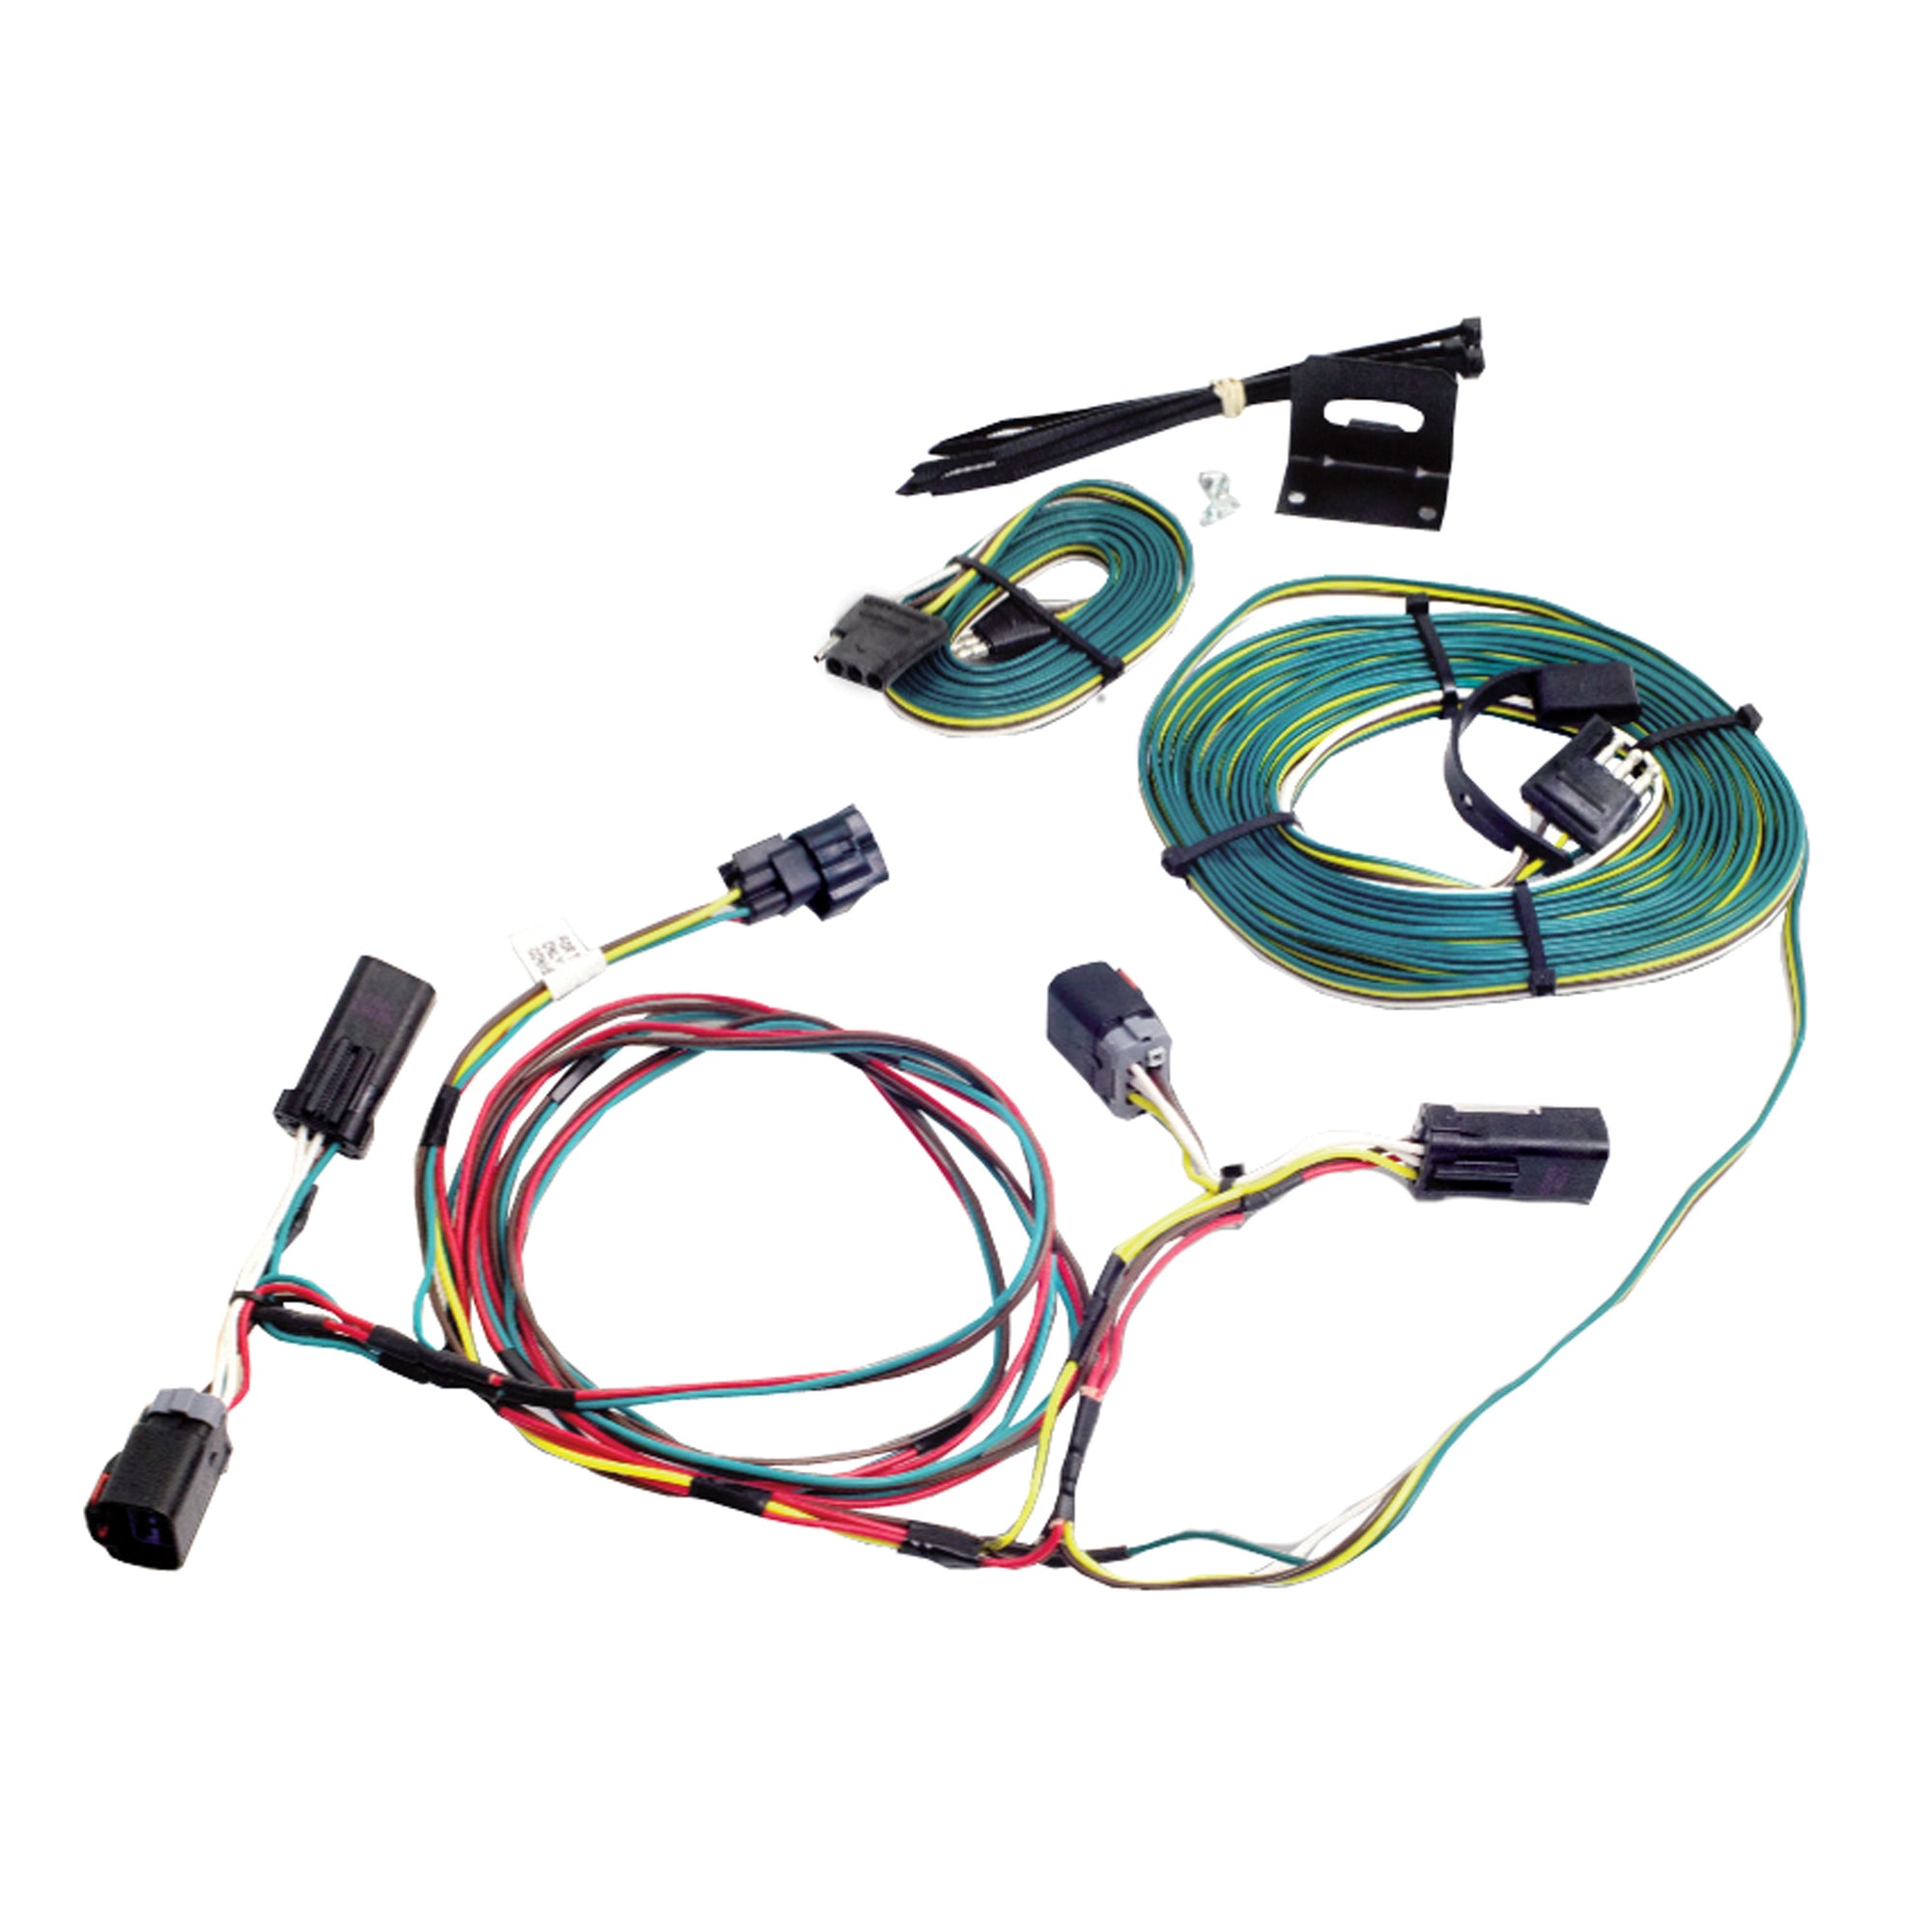 Demco 9523086 Towed Connector Vehicle Wiring Kit - For Honda Element '07-'12